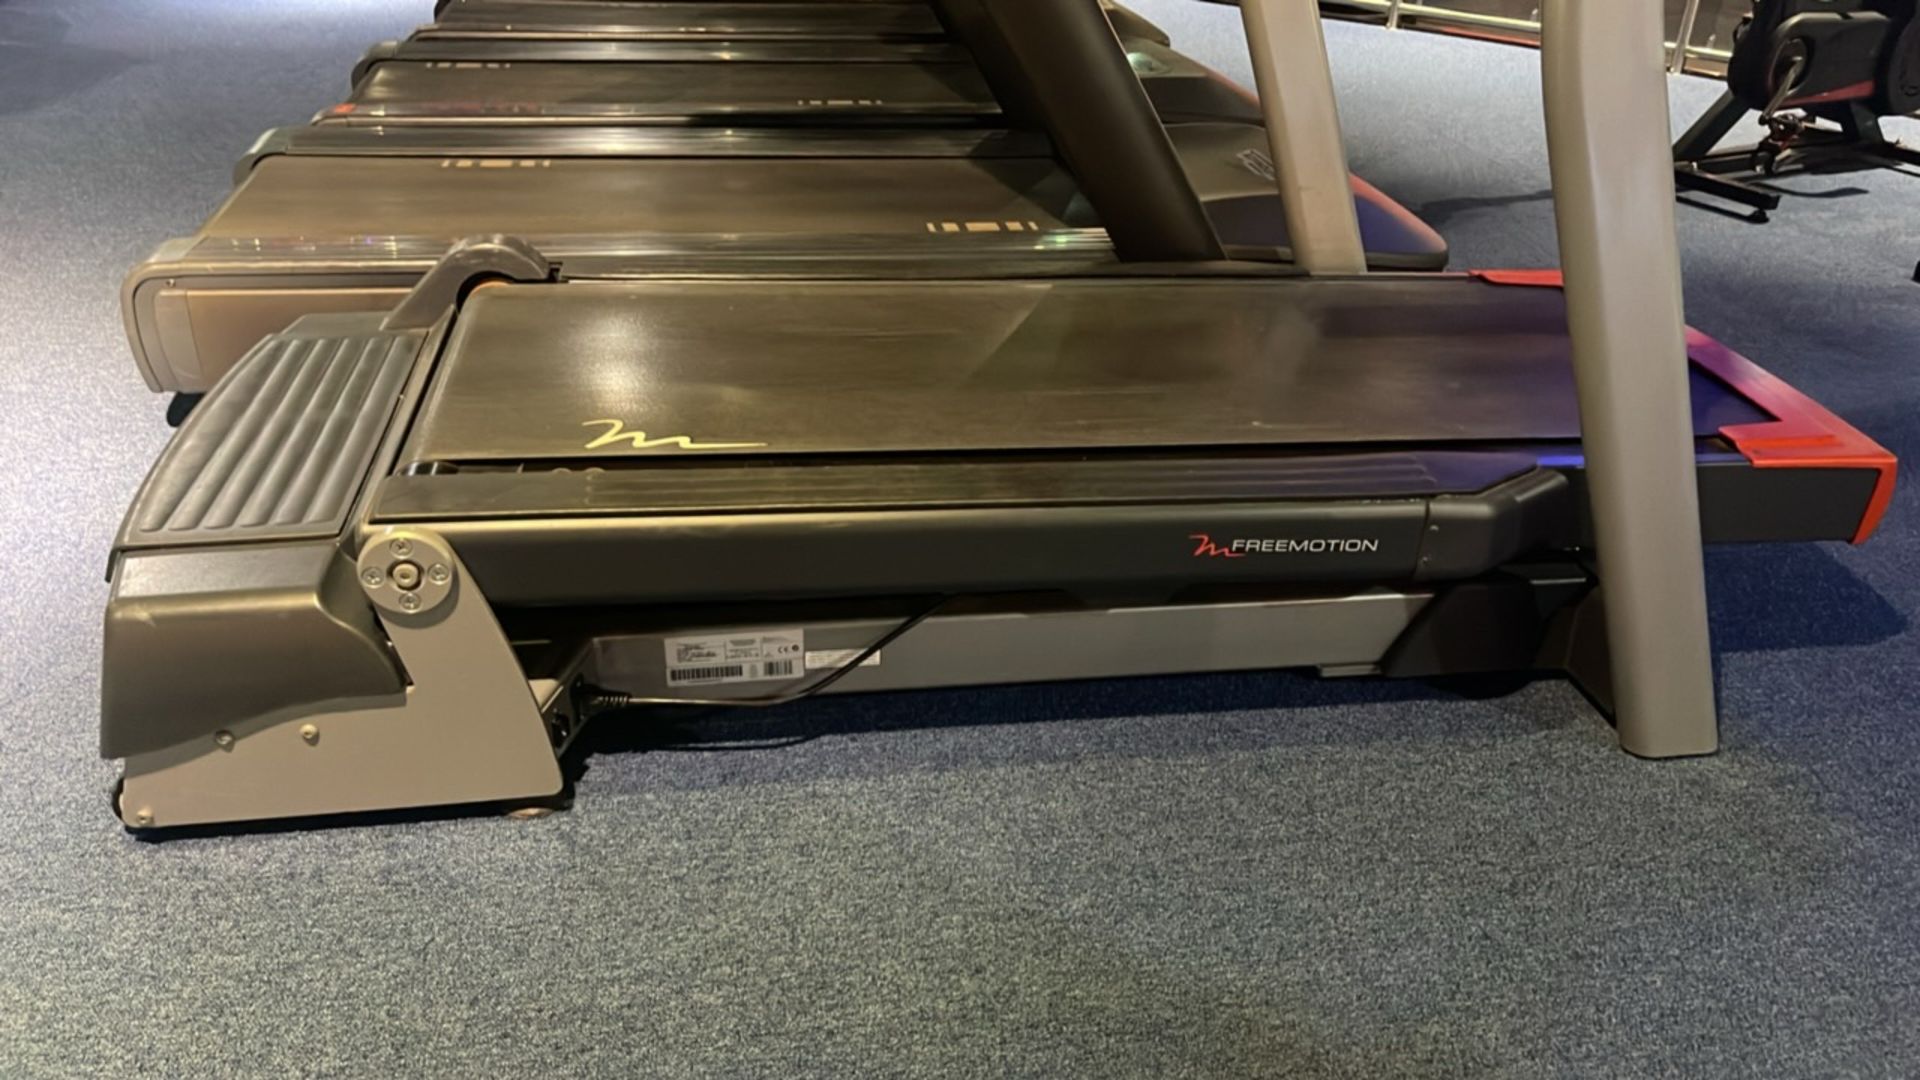 FreeMotion Incline Treadmill - Image 7 of 11